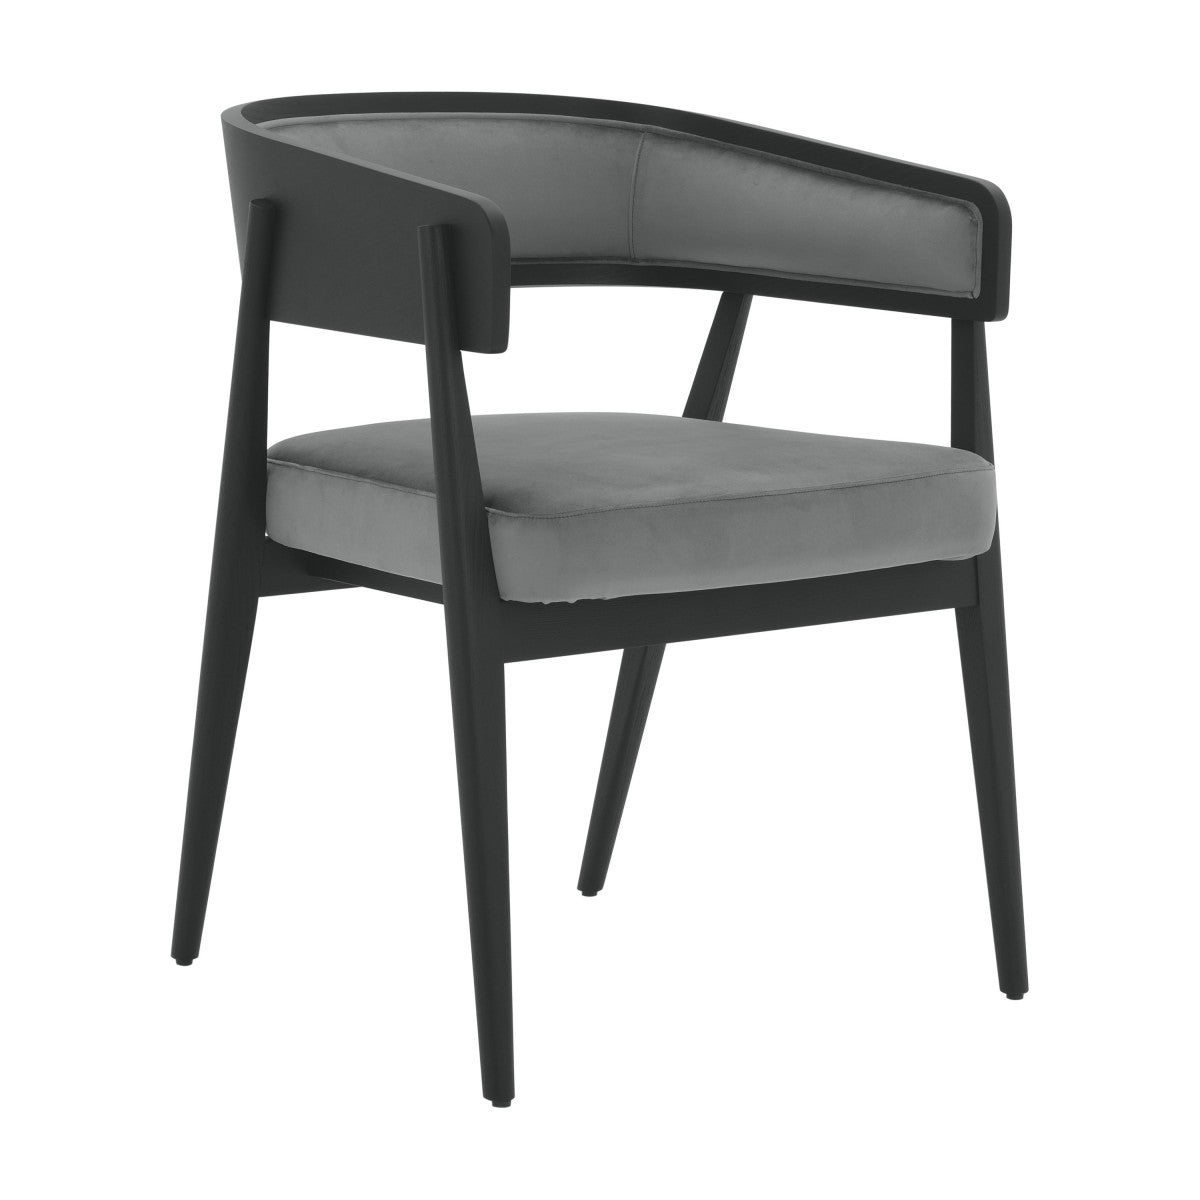 Afina Bespoke Upholstered Modern Contemporary Dining Armchair Chair MS014A Custom Made To Order